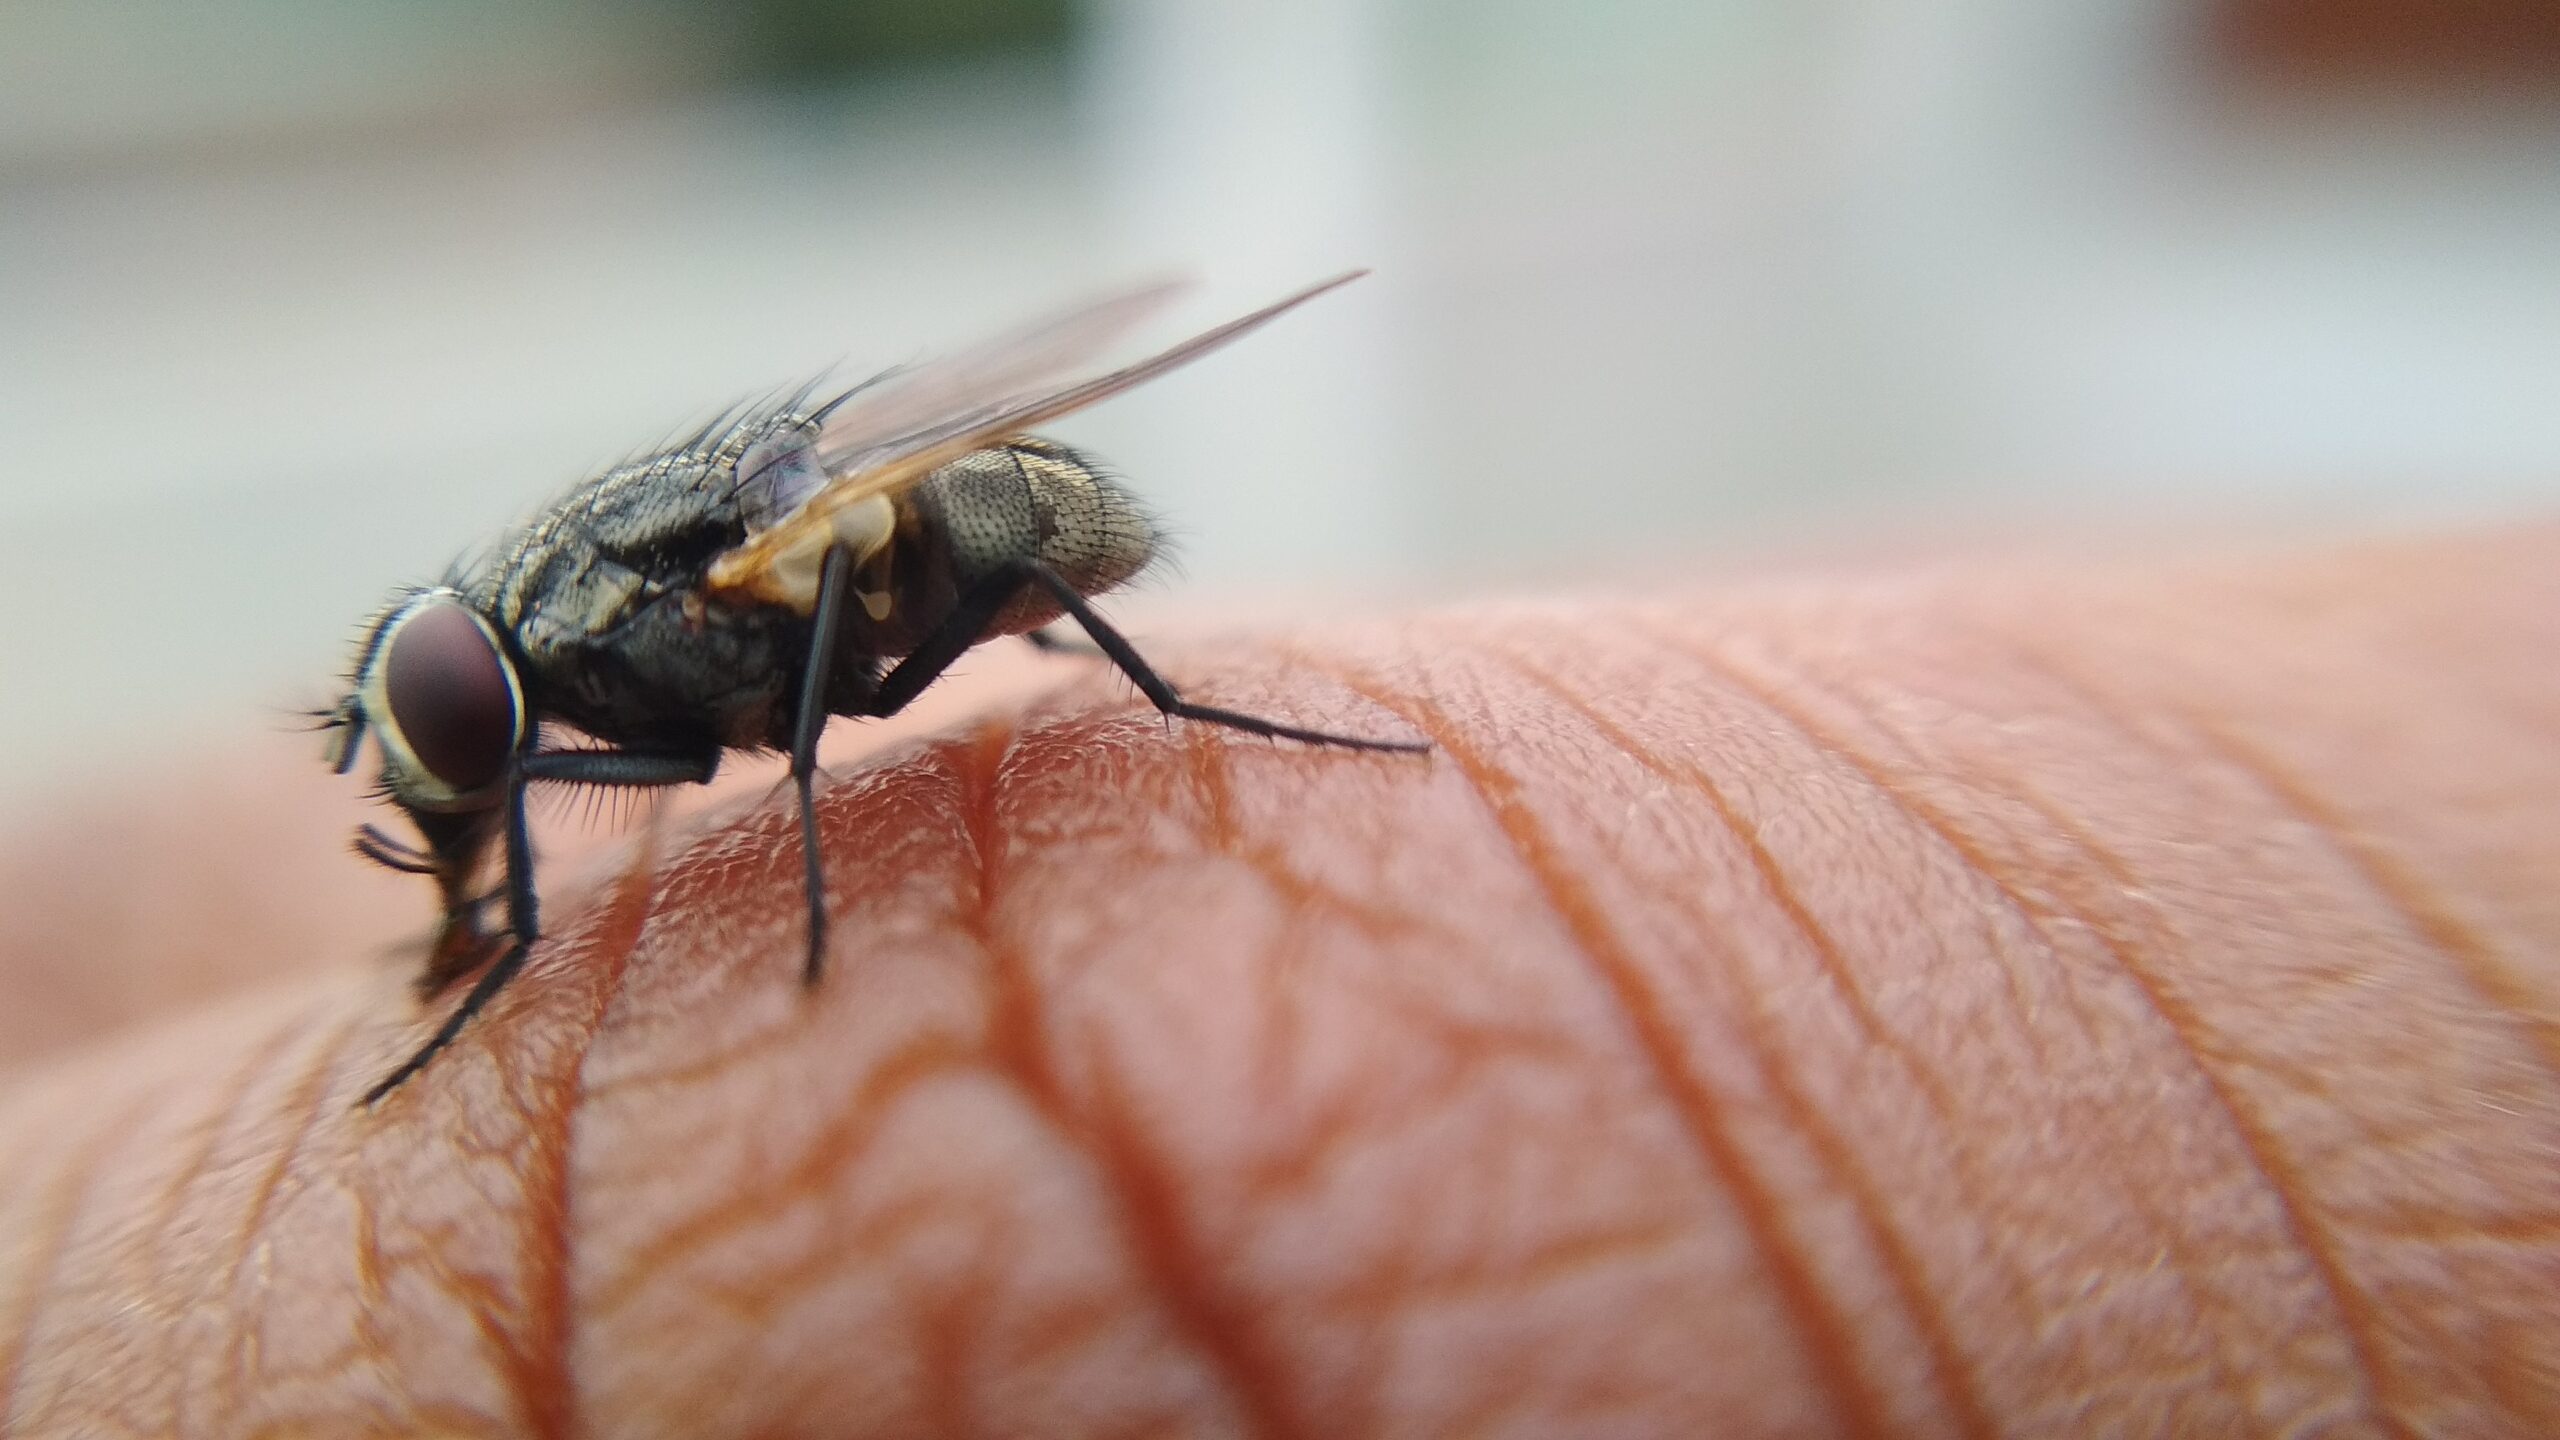 black and yellow fly on human skin